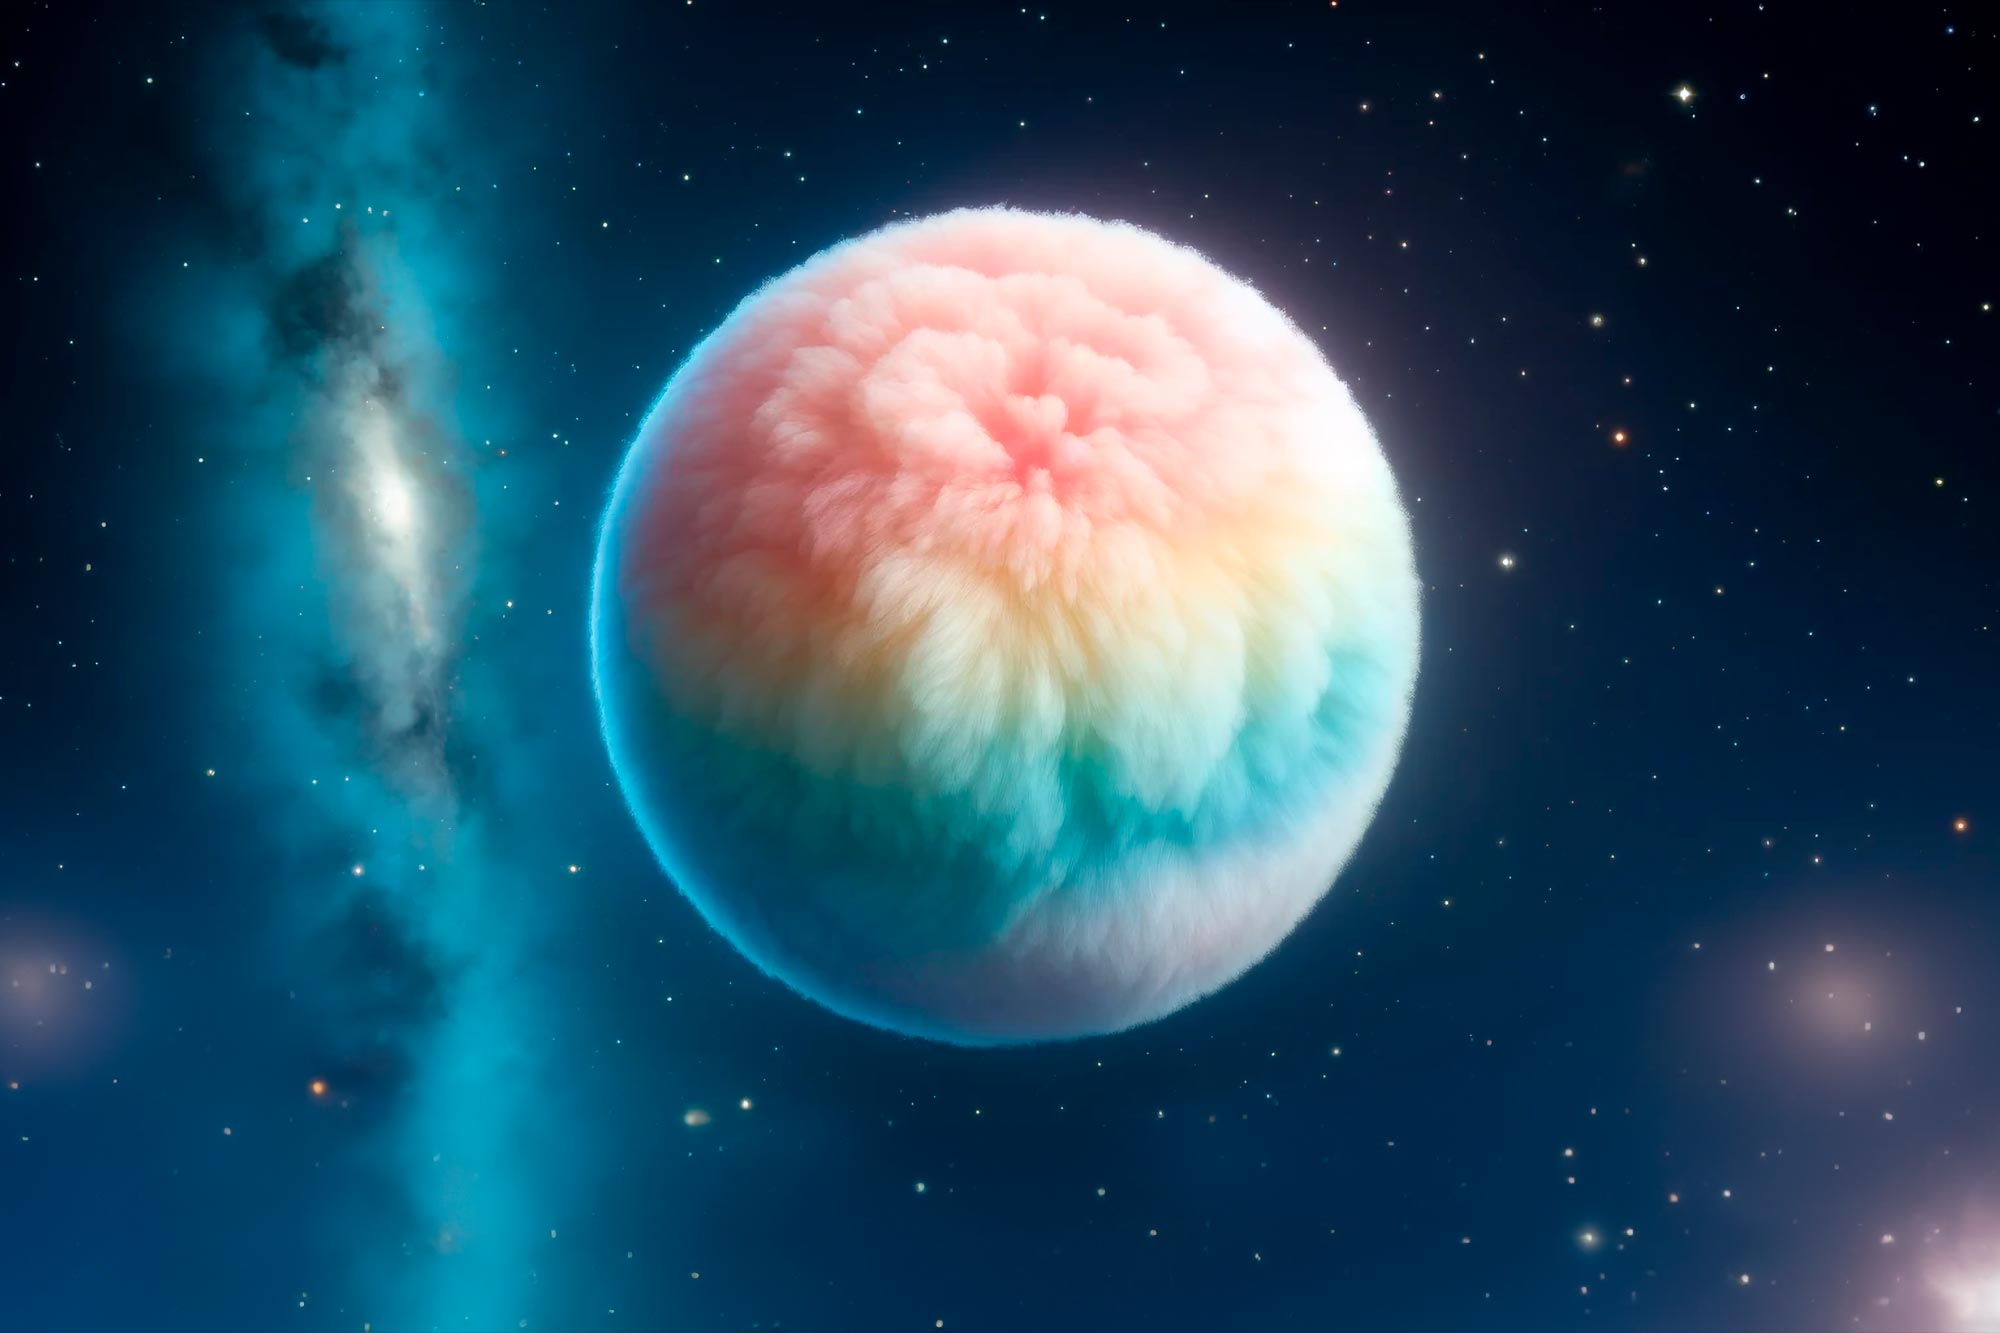 Discovery of a very thin ‘cotton candy’ exoplanet shocks scientists – ‘We can’t explain how this planet formed’